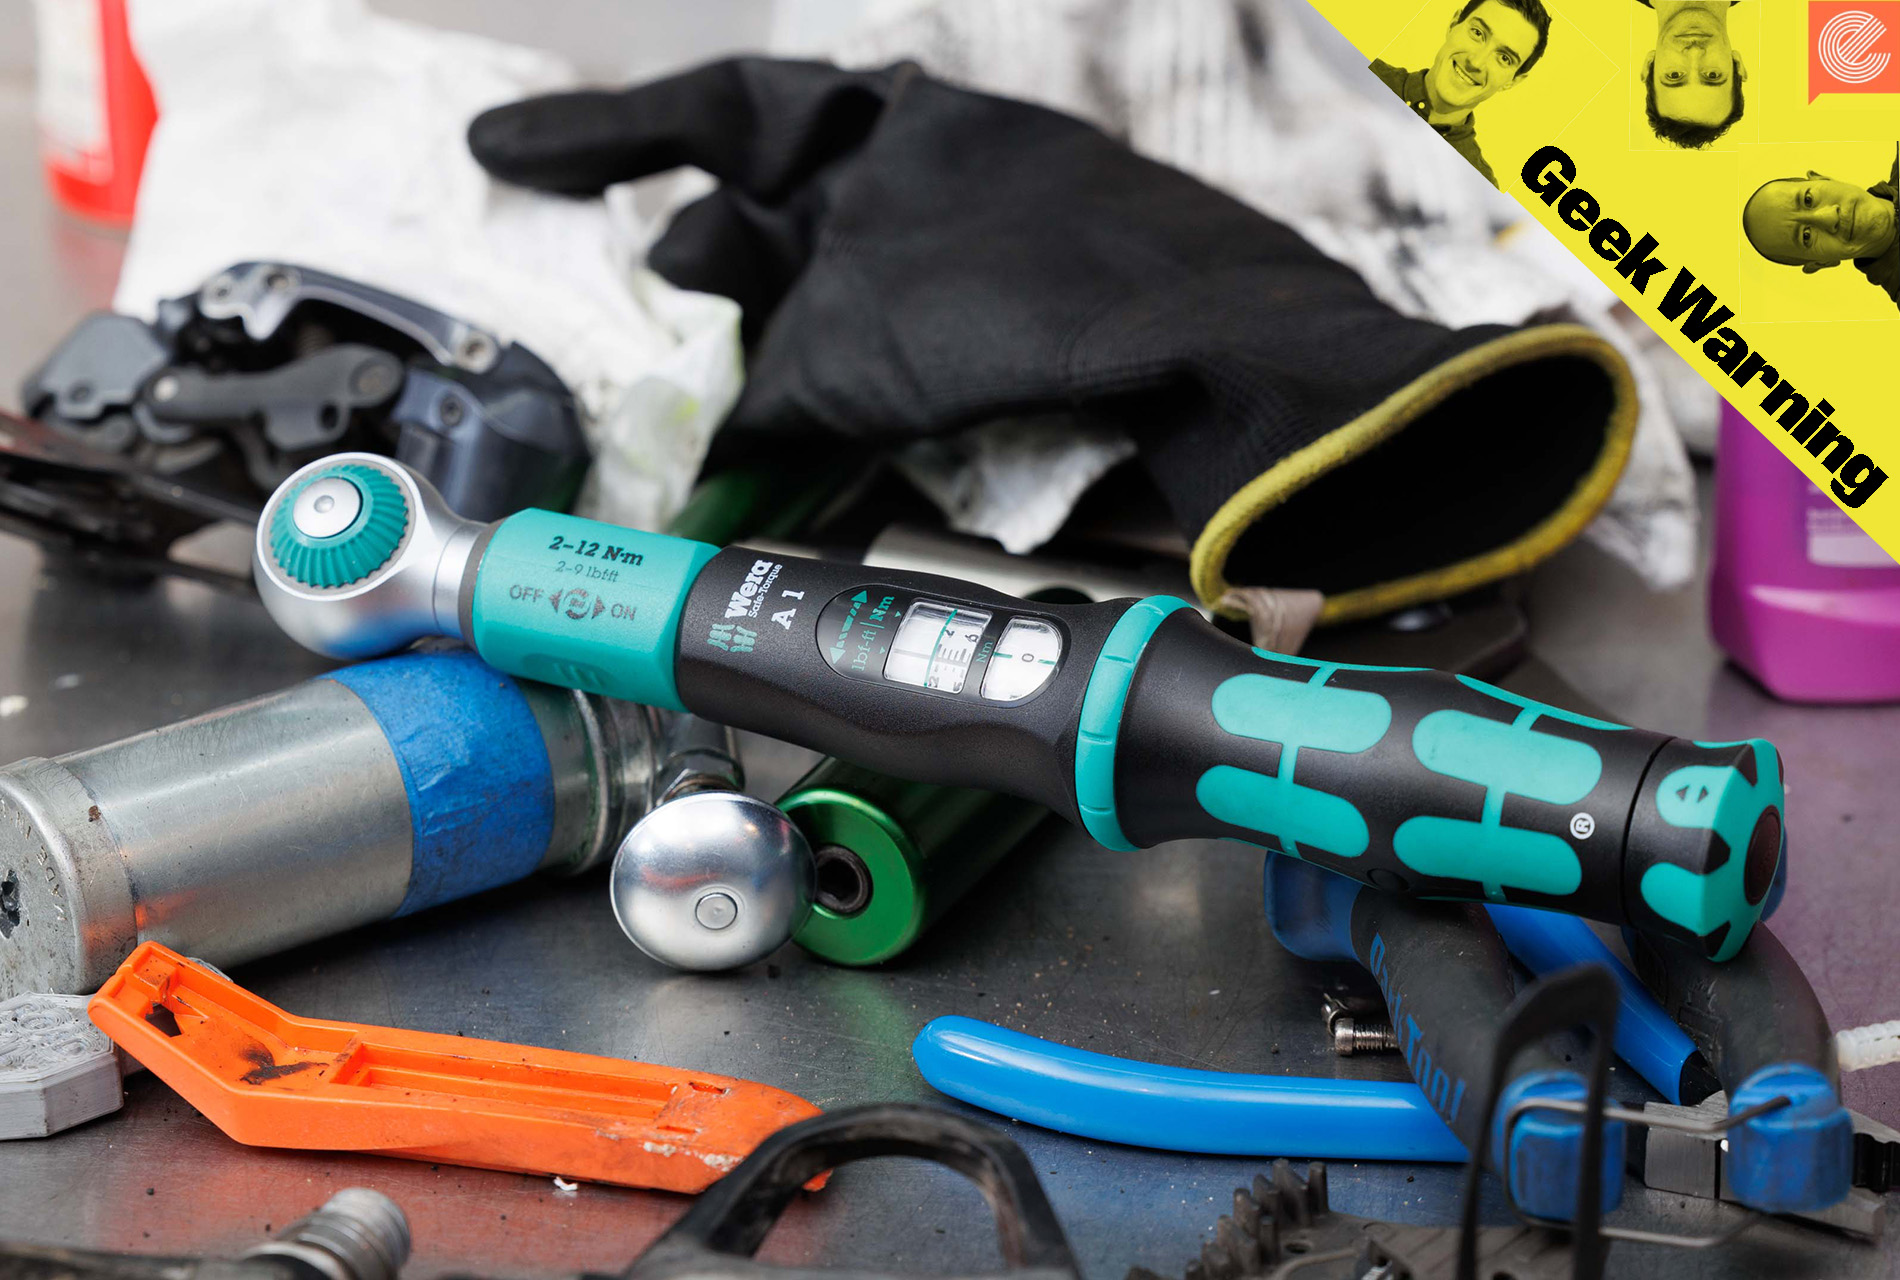 What's your favourite Wera tool and why? Share with us in the comments